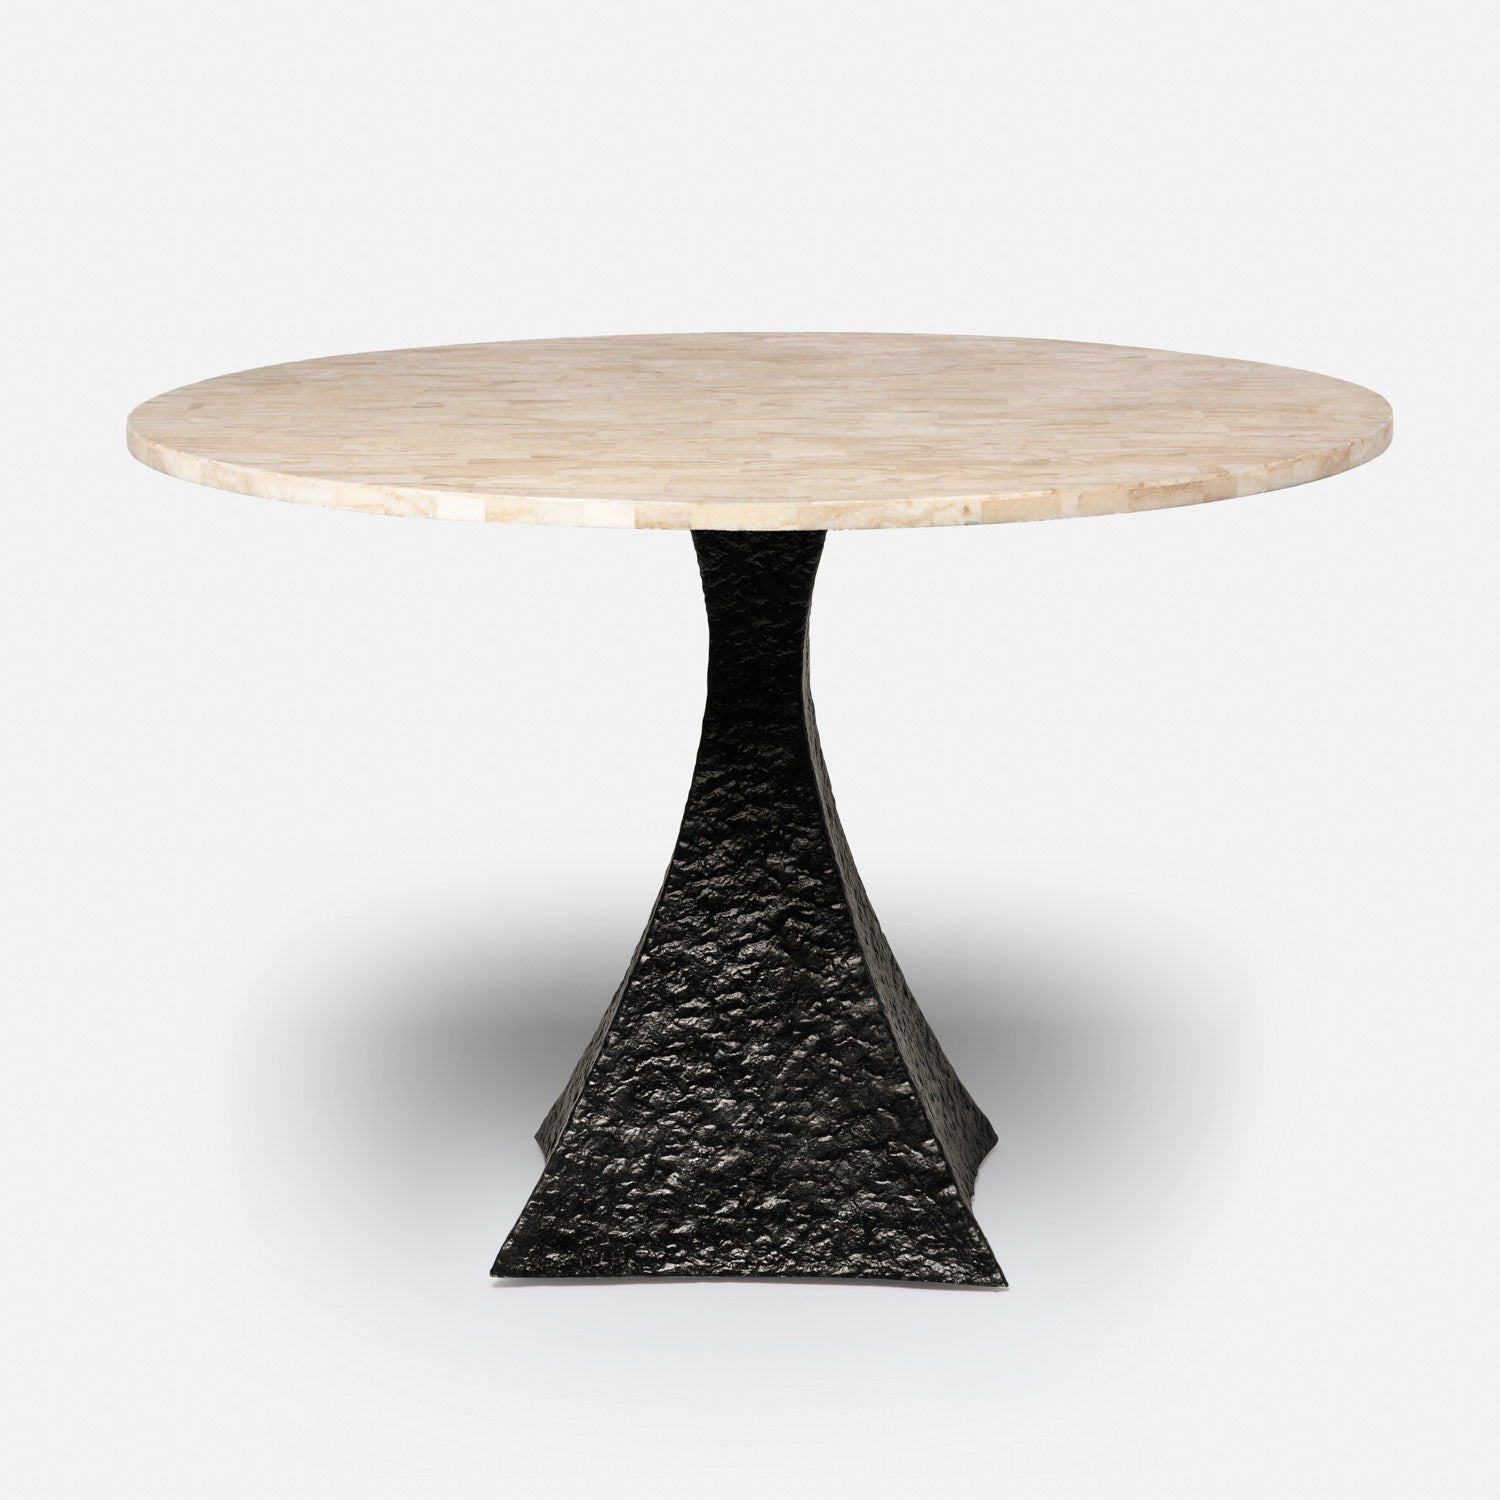 Made Goods Noor 48" x 30" Bumpy Black Iron Dinning Table With Round Beige Crystal Stone Table Top